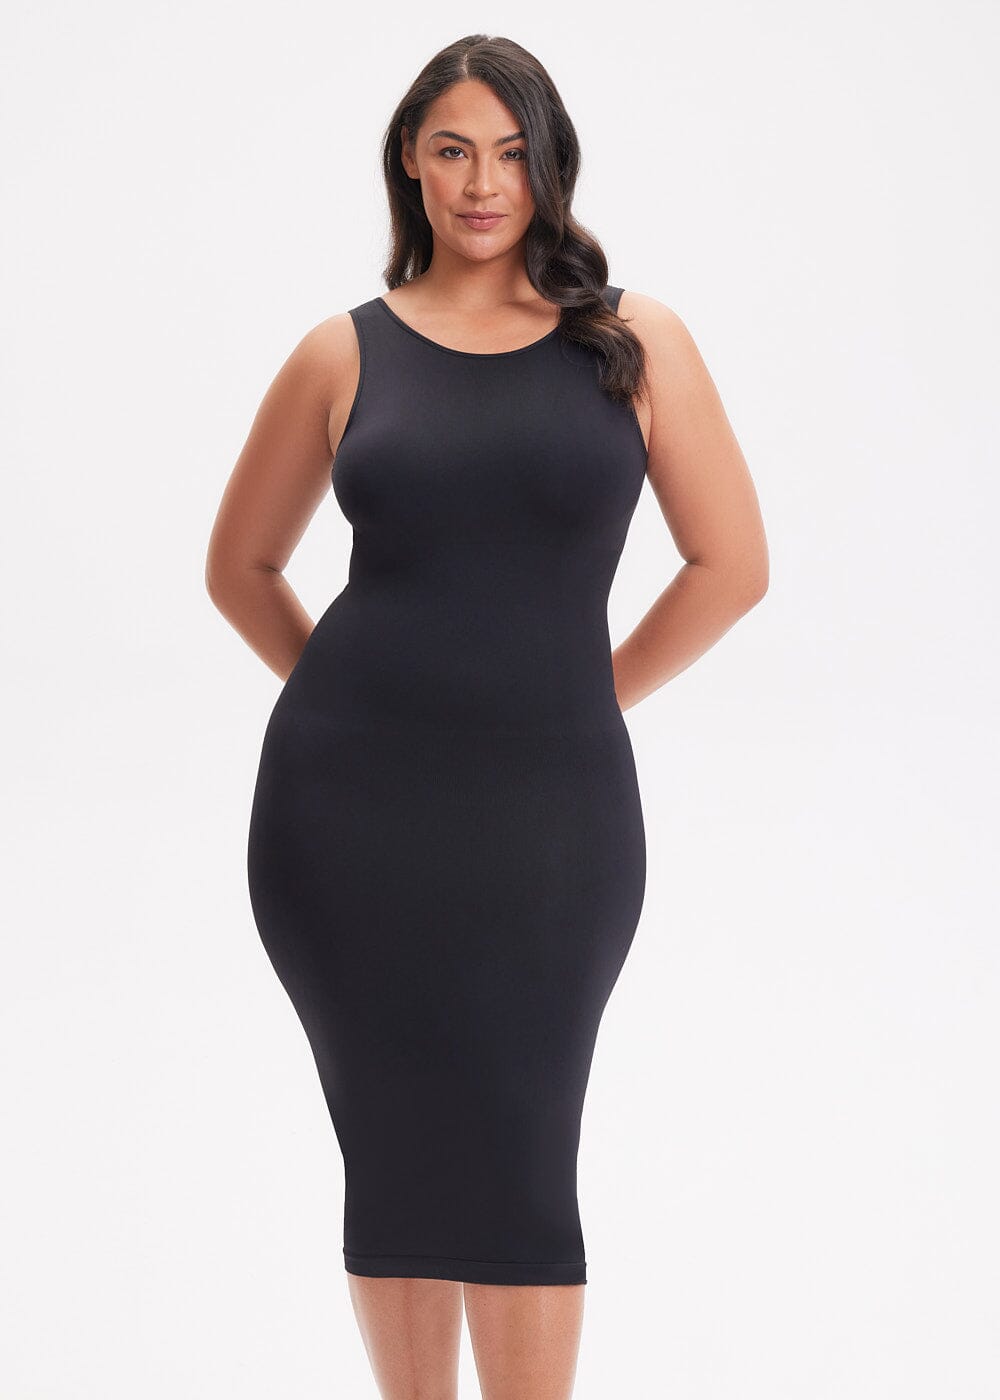 Your new favorite shapewear dress just dropped only at #sheswaisted ✨🔥